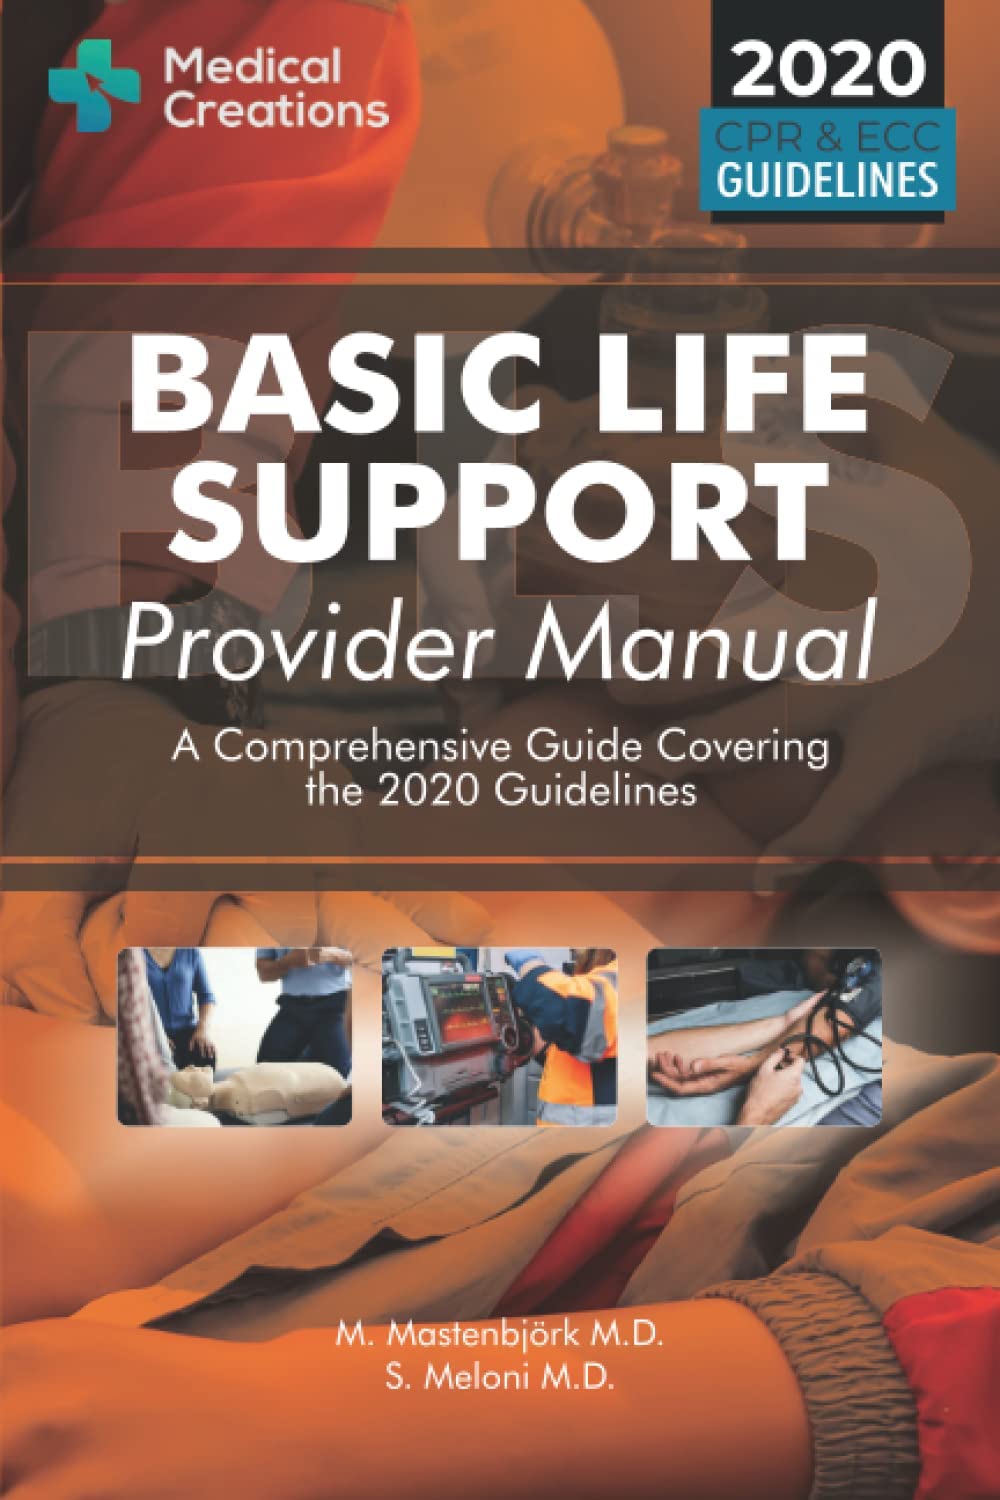 Basic Life Support Provider Manual – A Comprehensive Guide Covering the Latest Guidelines